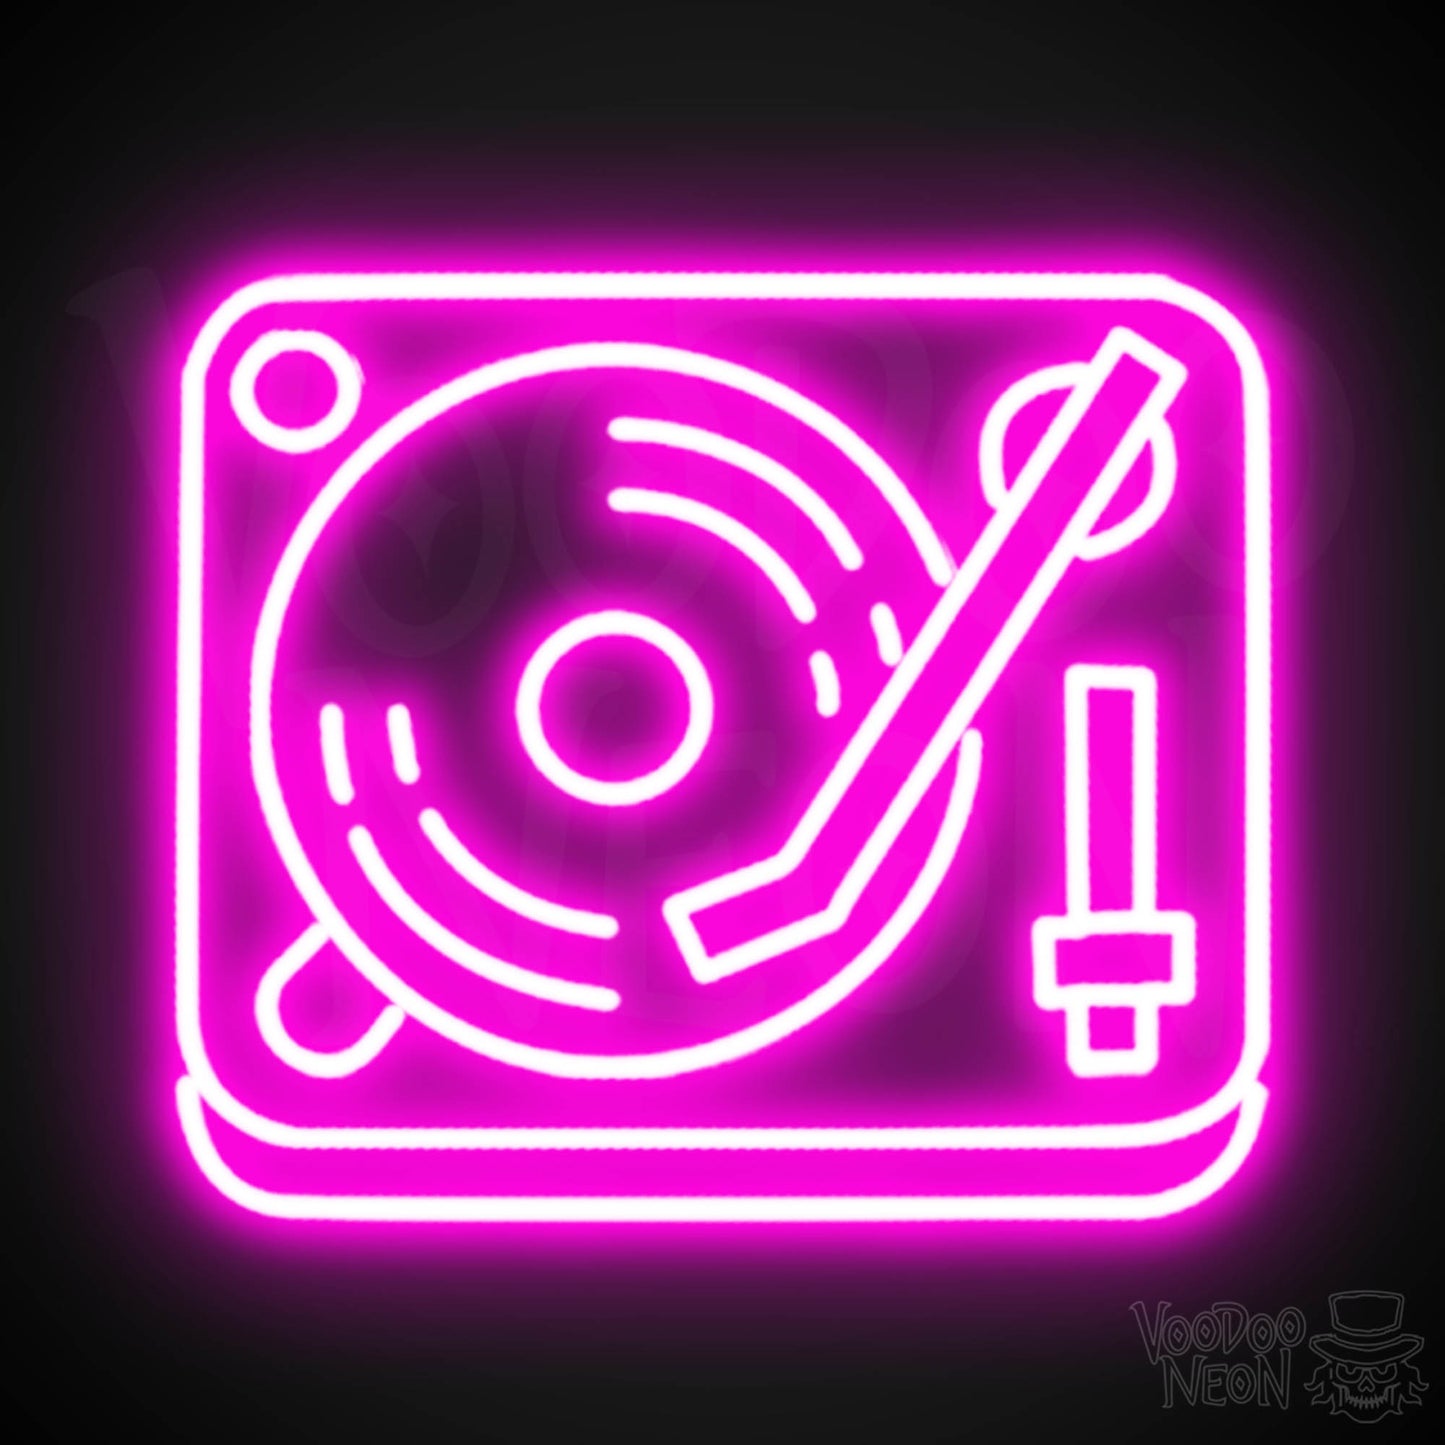 Retro Record Player Neon Sign - Record Player Neon Wall Art - Color Pink